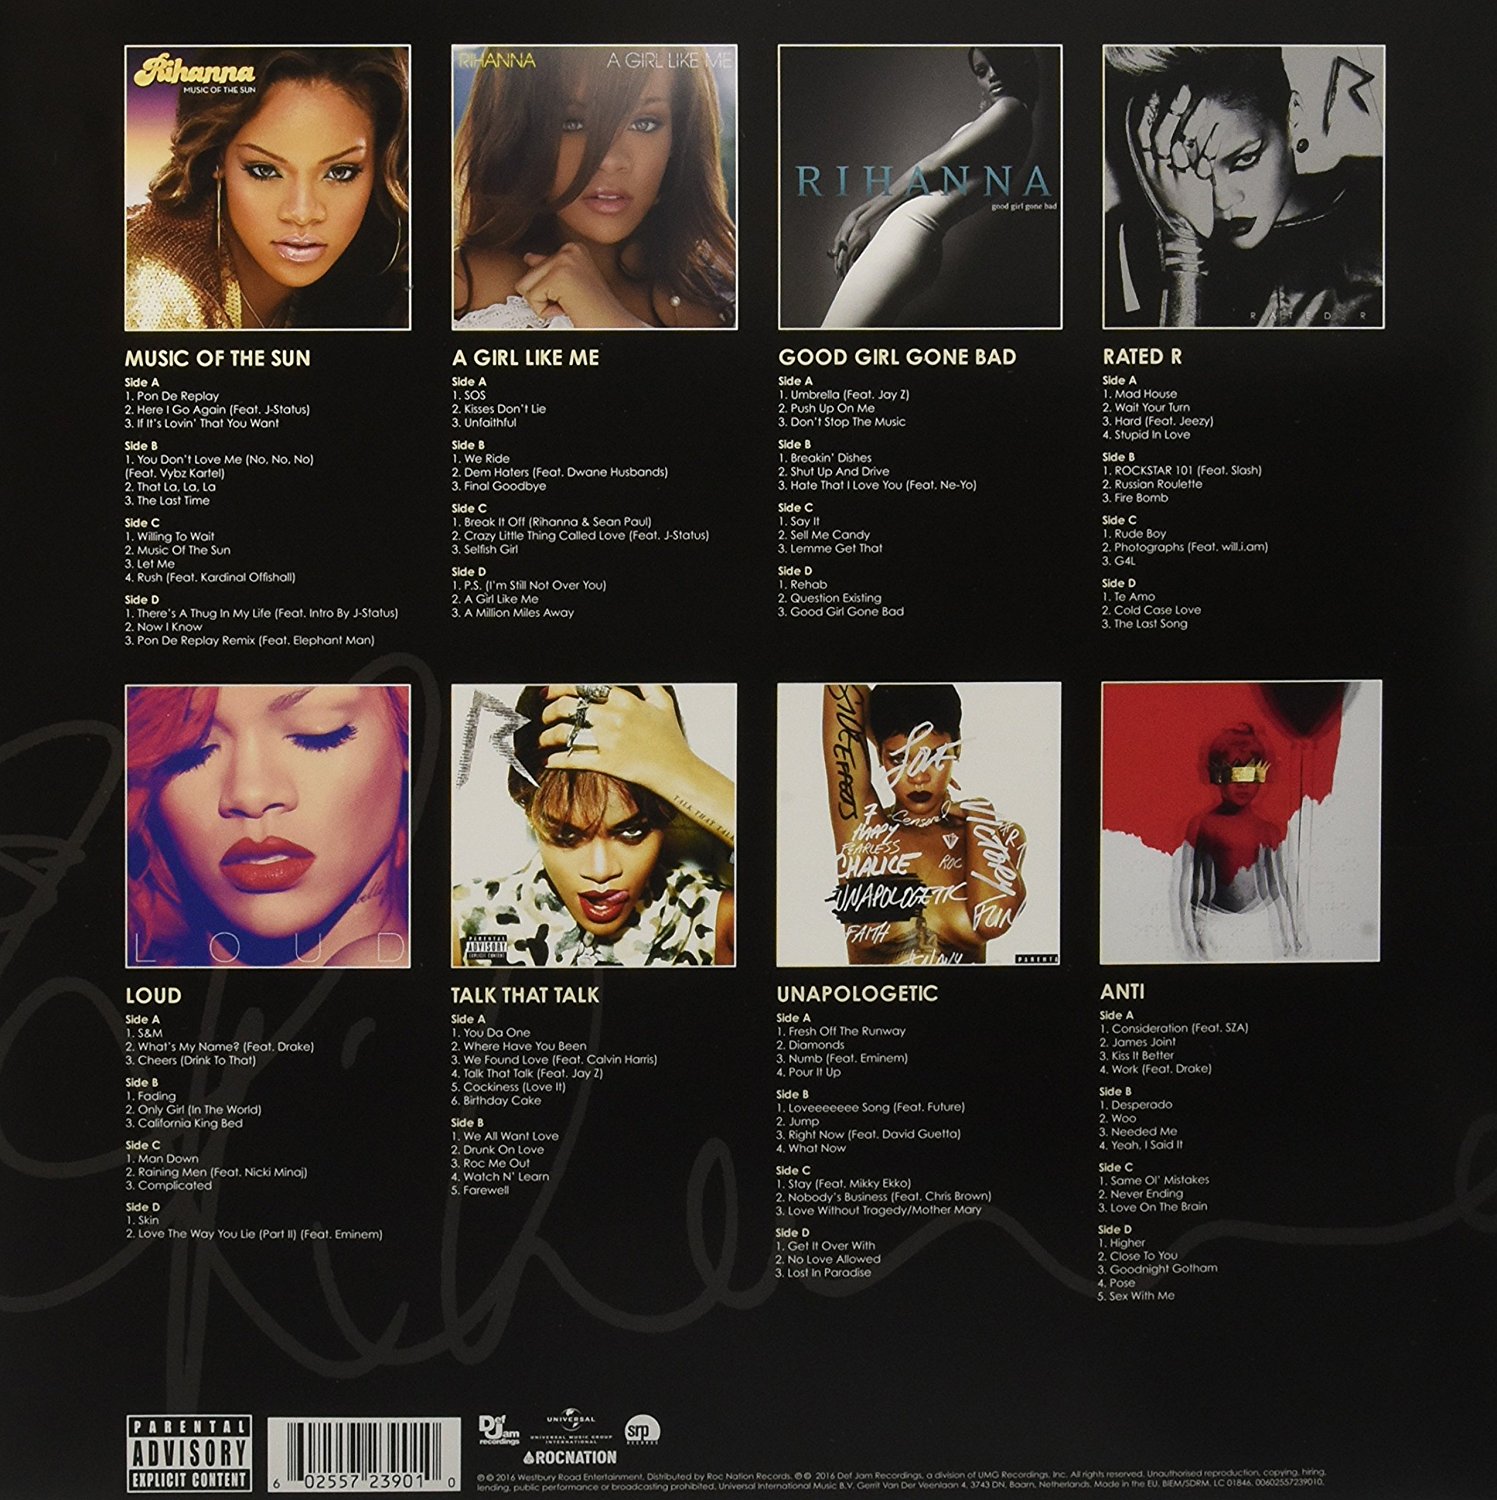 Stream Rihanna - Mad House, Russian Roulette, Hard feat. Jeezy